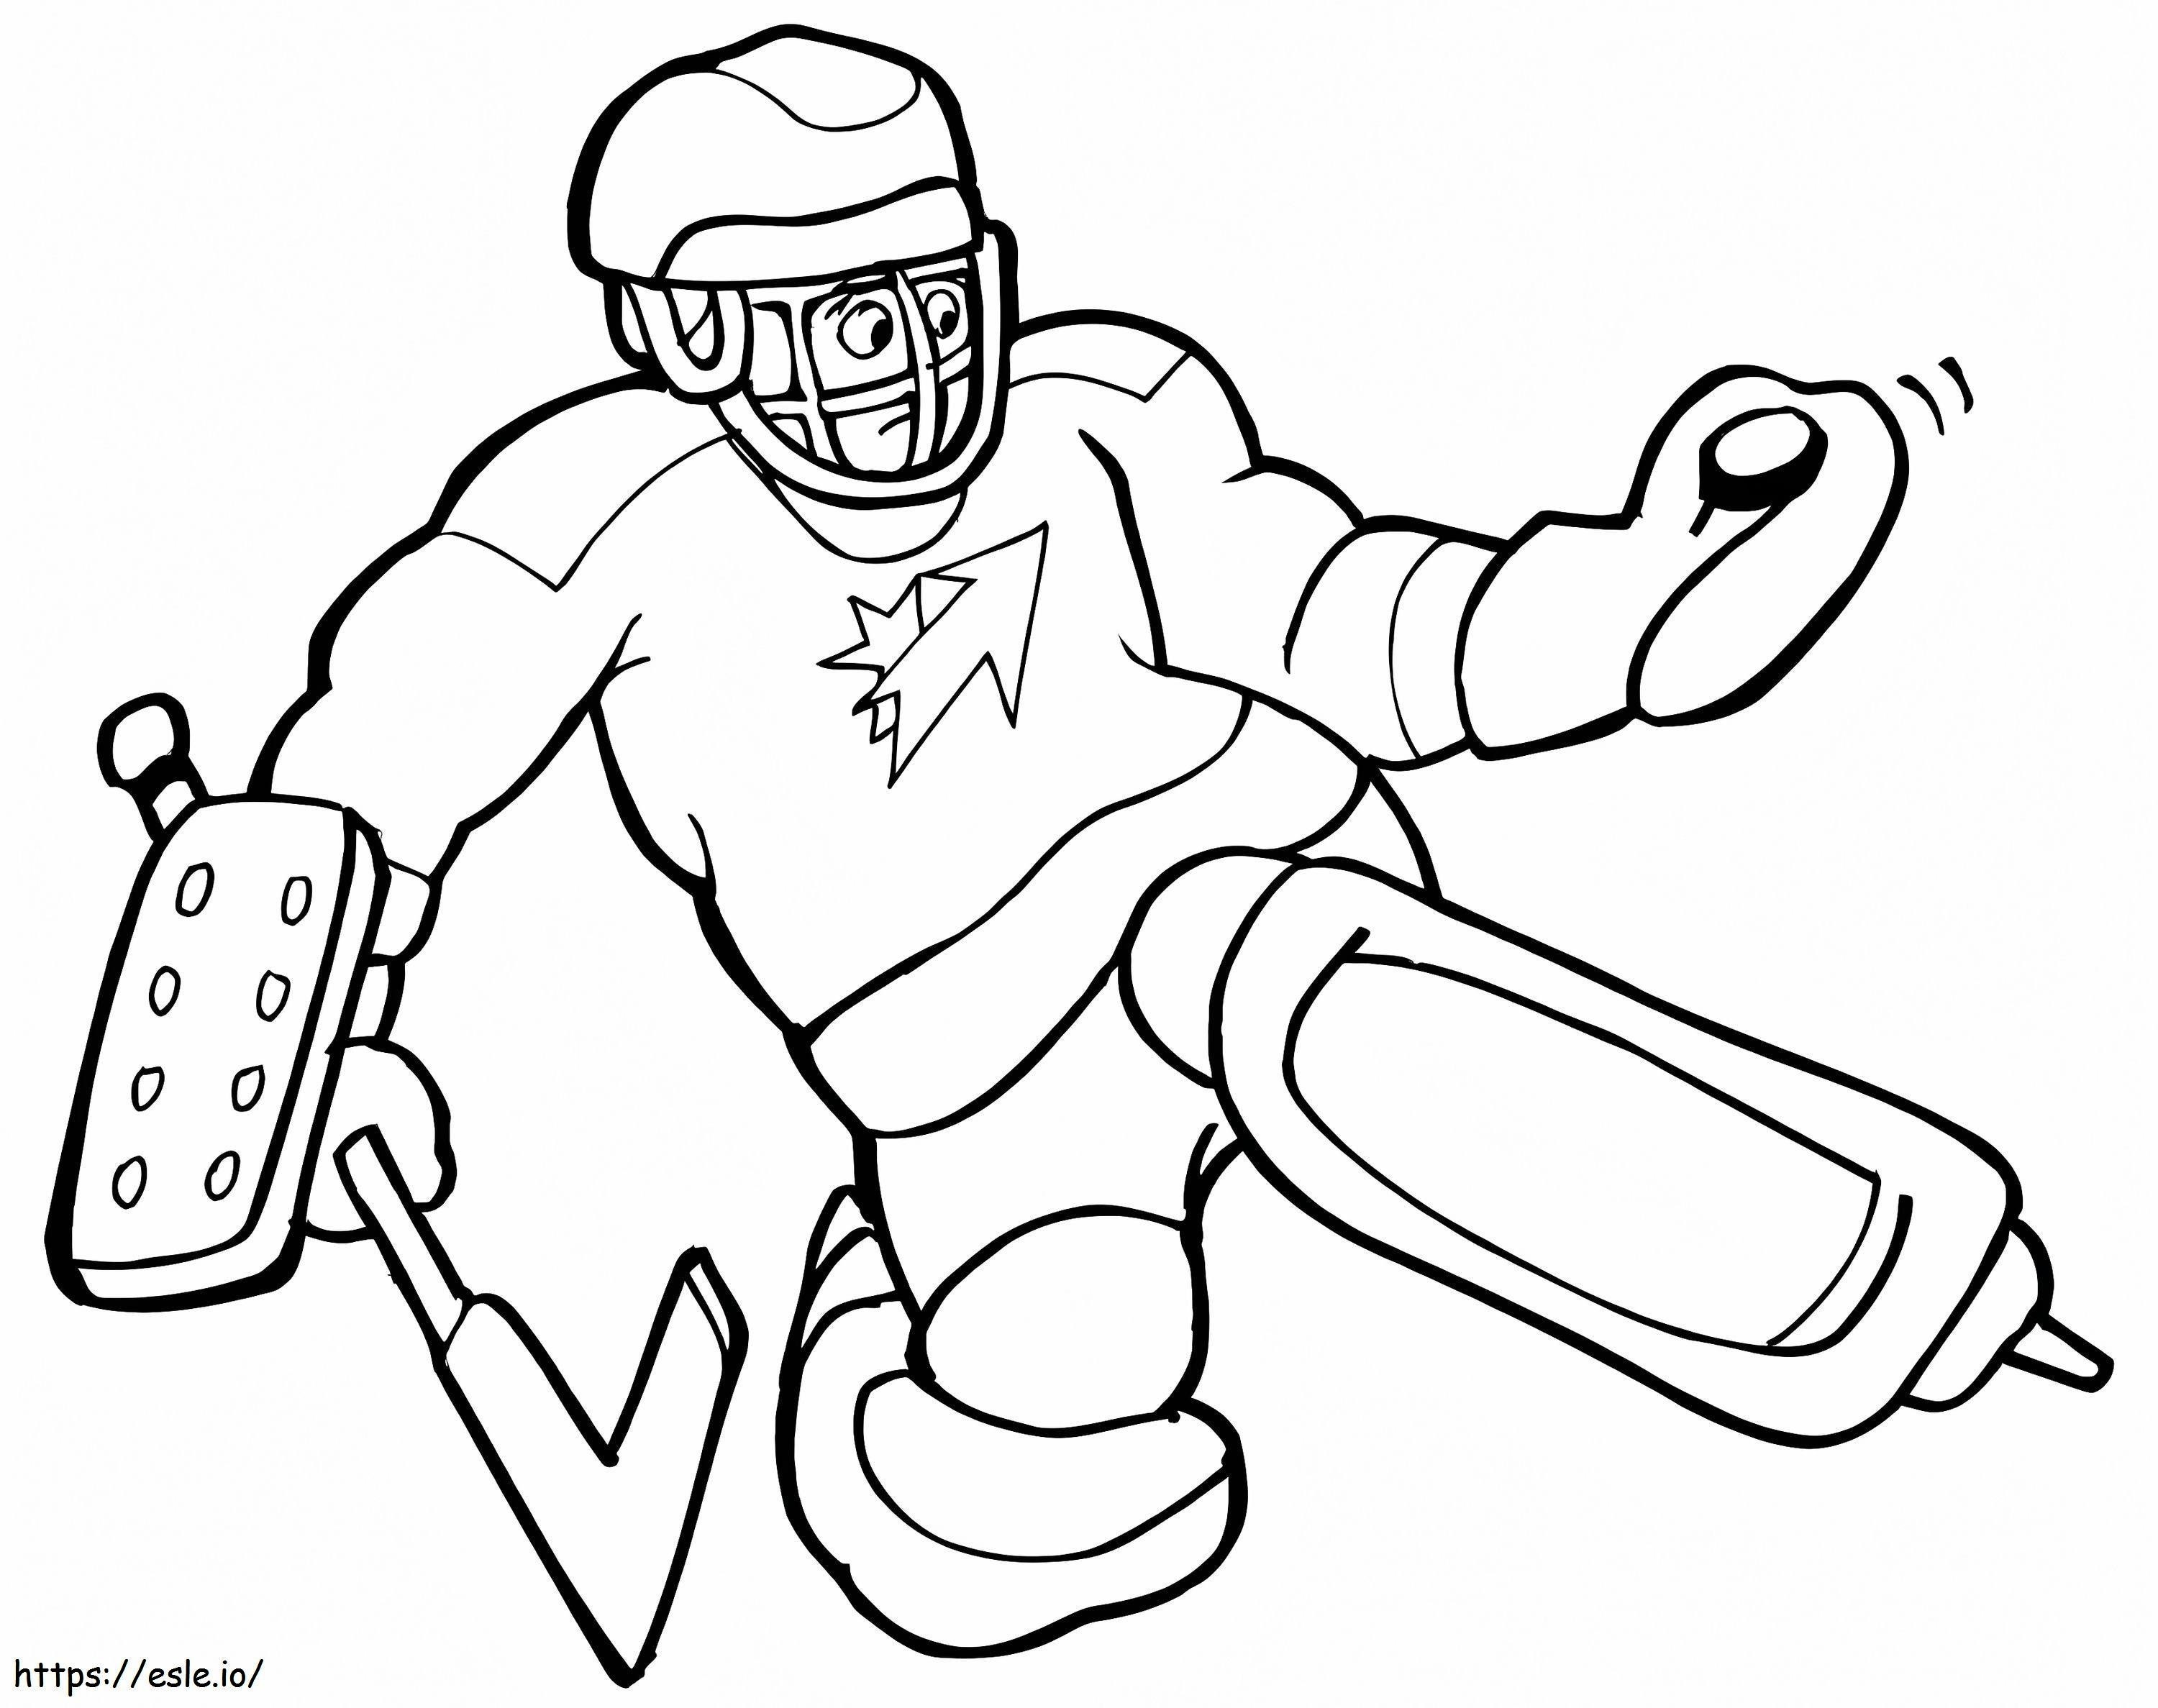 Simple Hockey Player coloring page